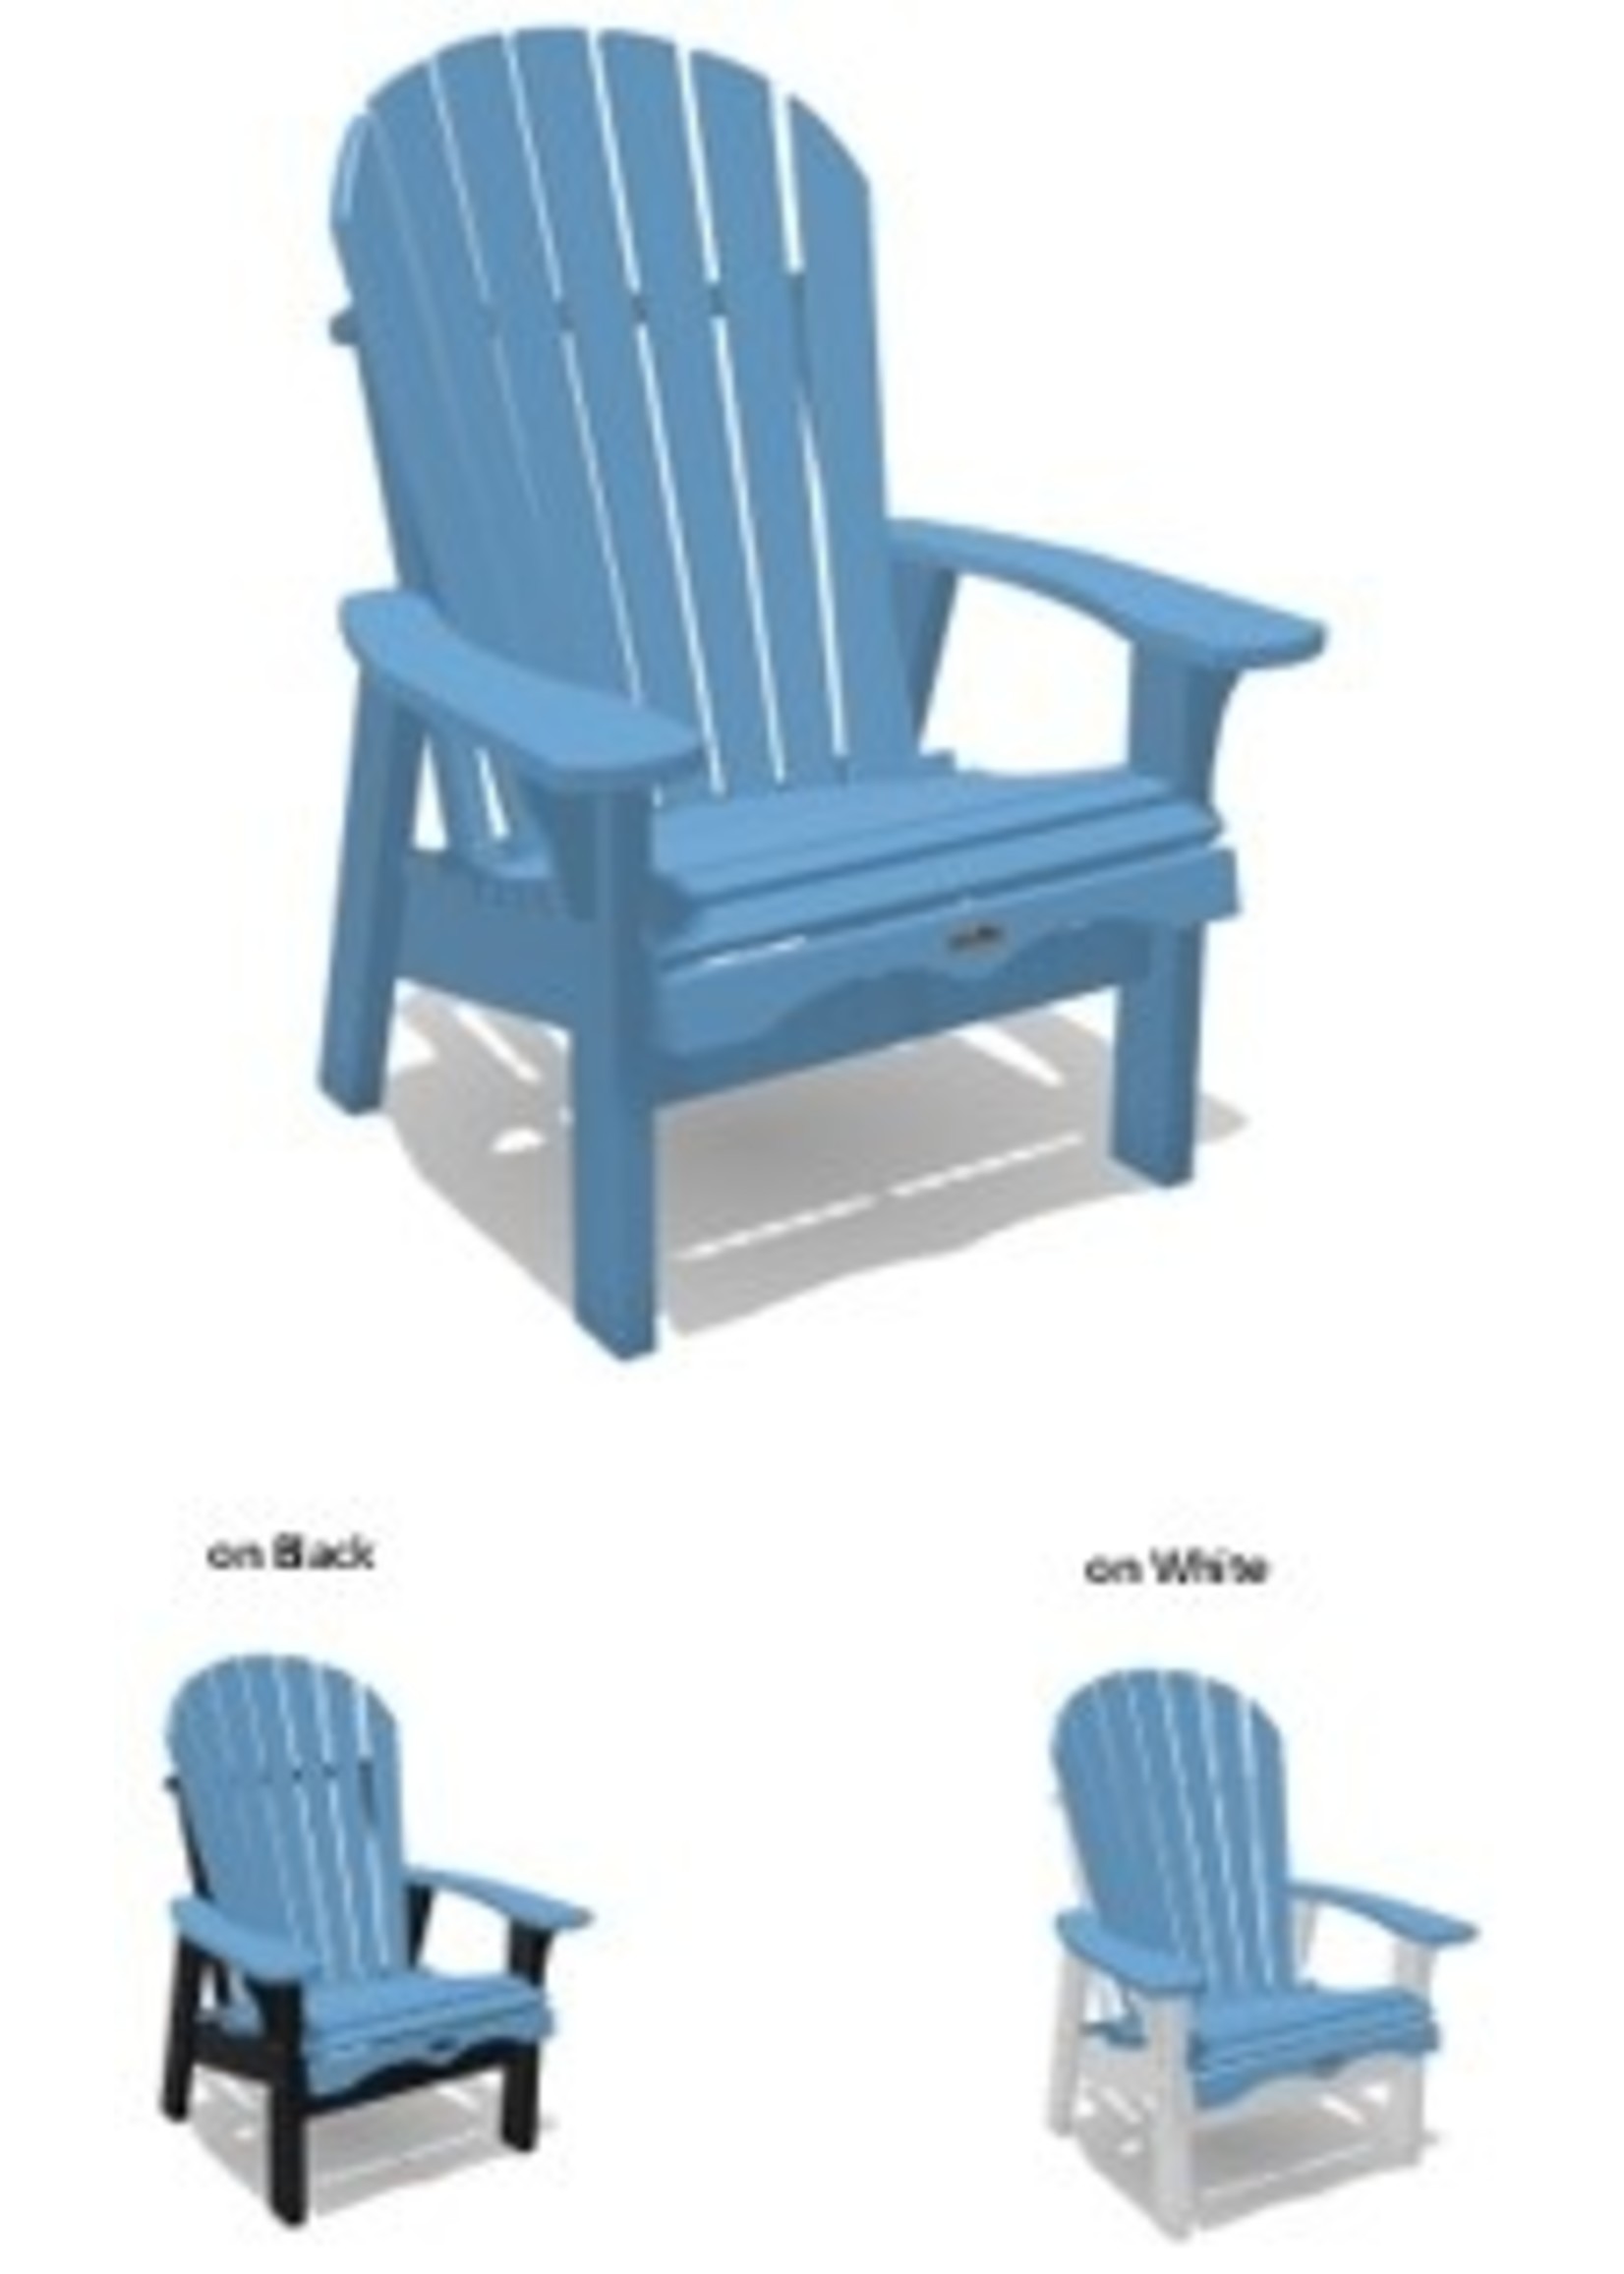 Woodmill of Muskoka Raised Adirondack Chair Deluxe with 5.5" Wide Arms